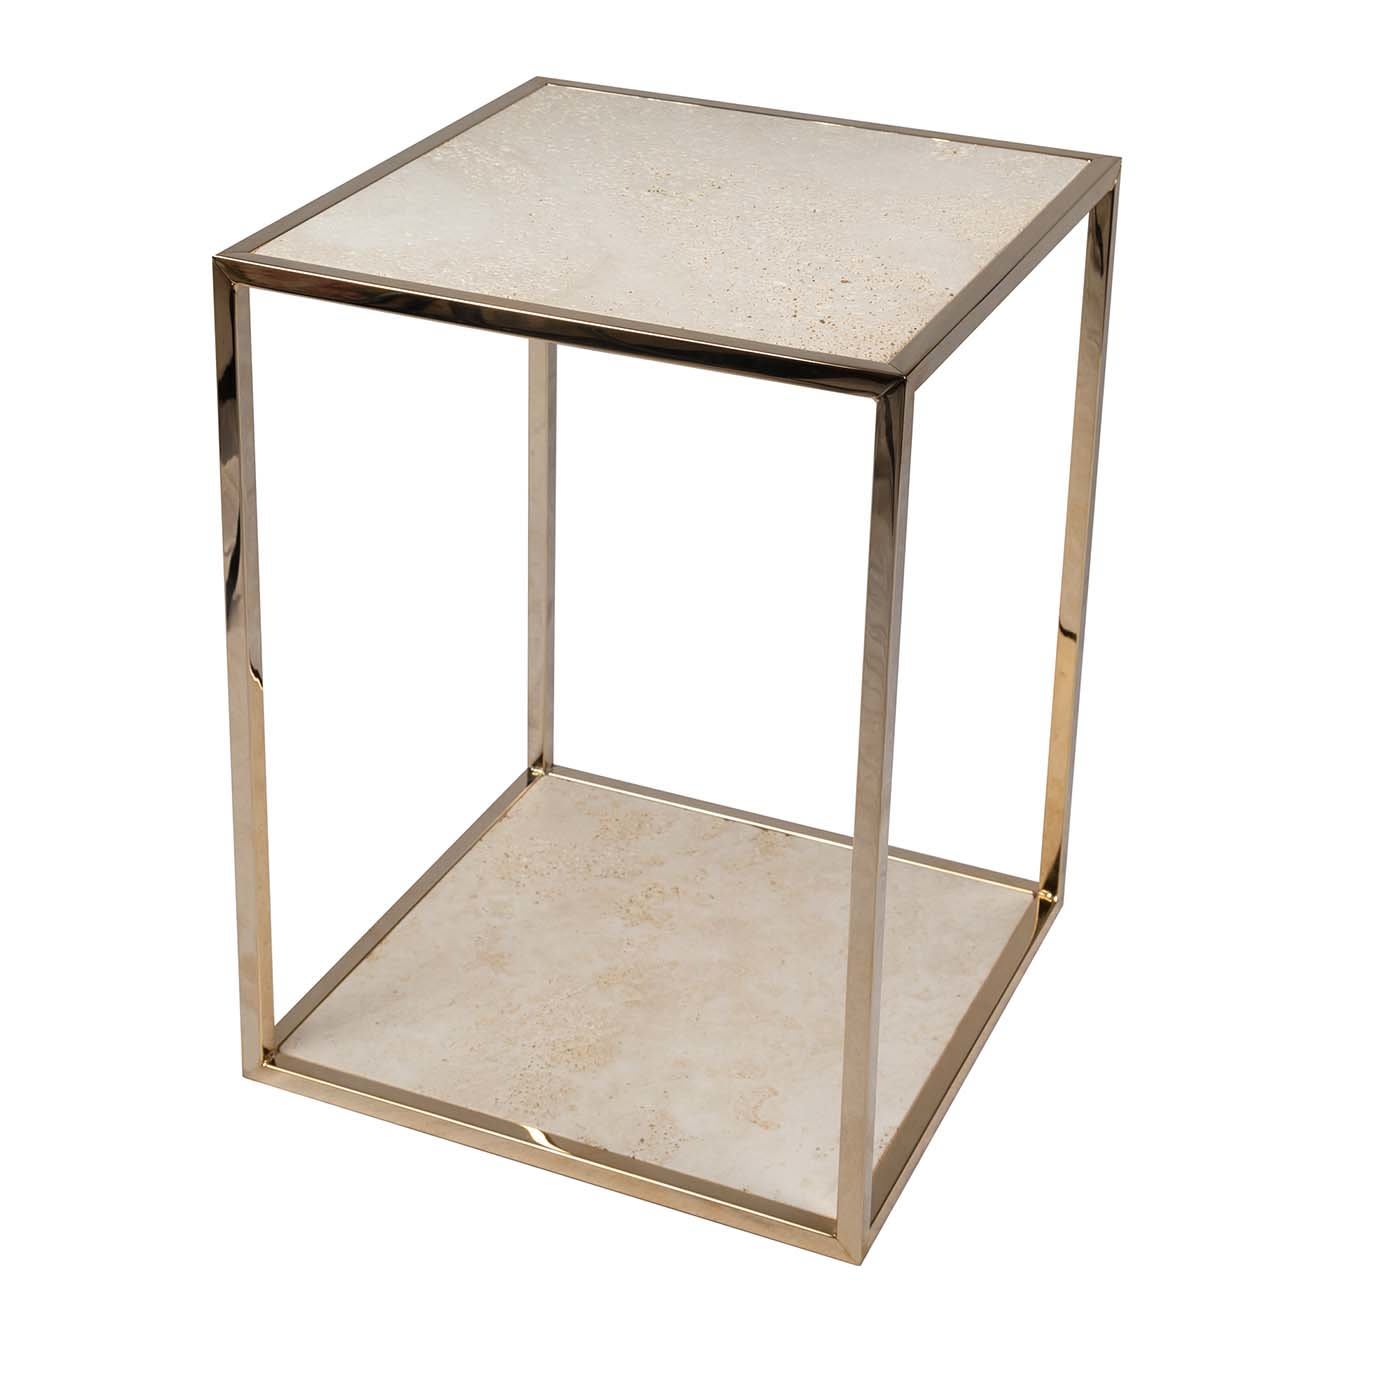 Cubit side table with double stone - Cube3